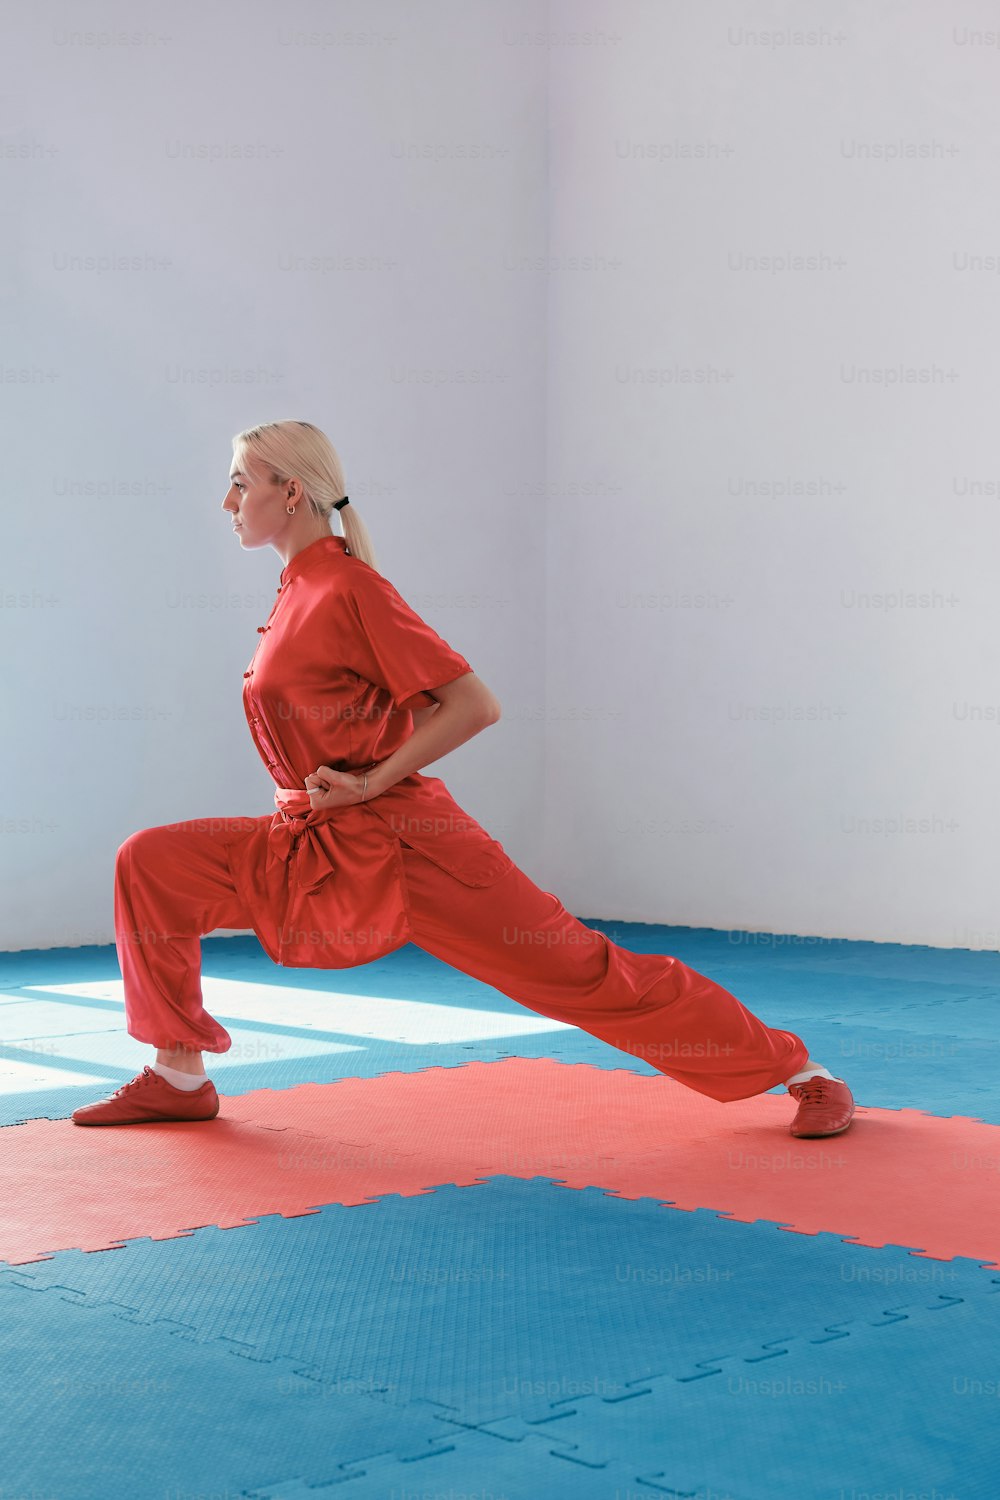 a woman in a red outfit is doing a yoga pose